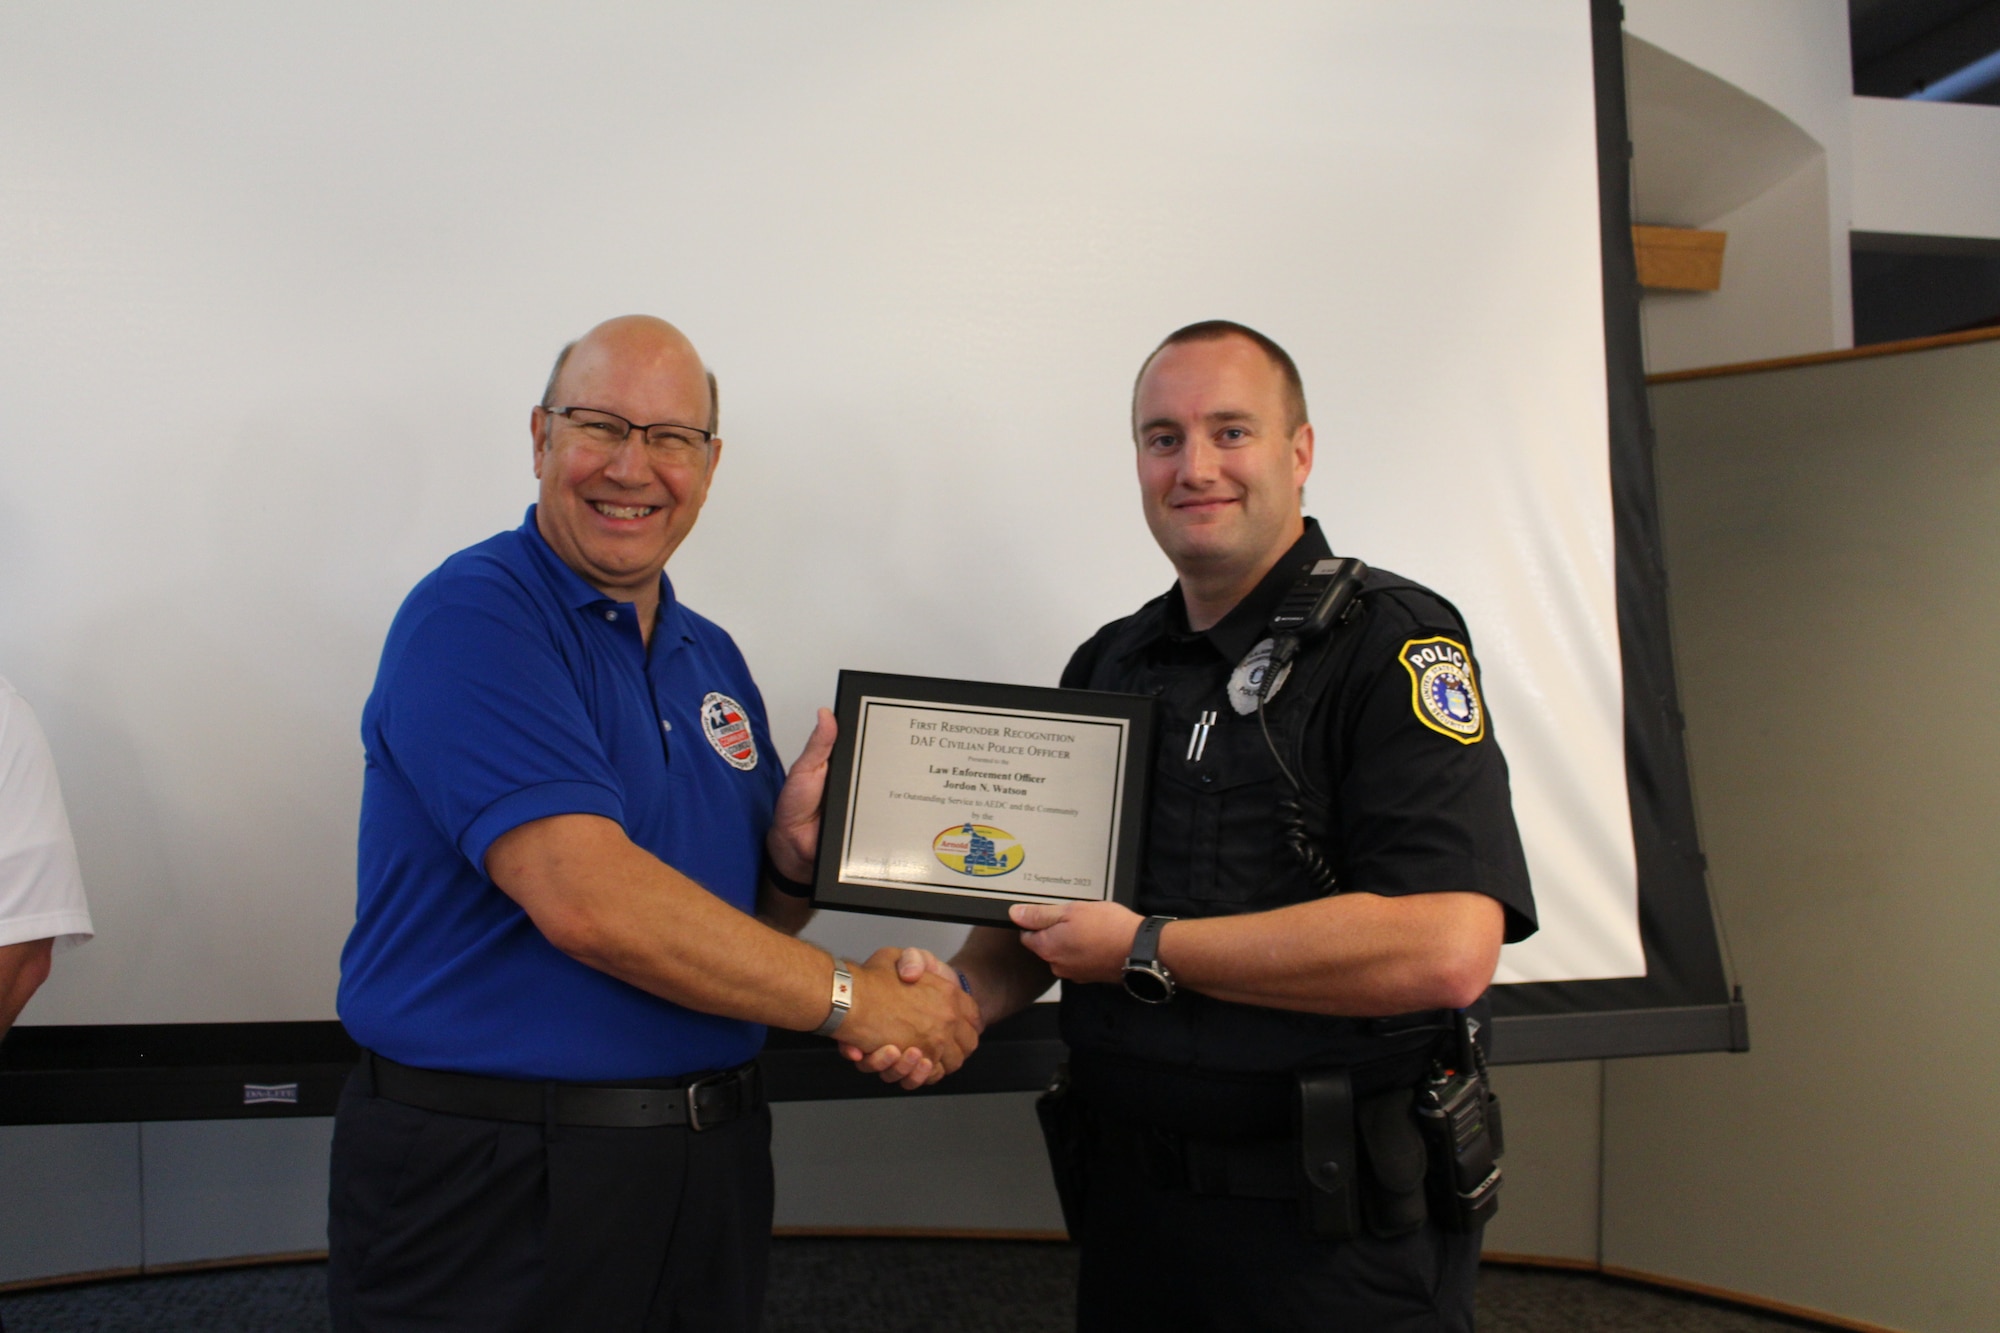 Glenn Liston, Arnold Community Council president, left, presents Nick Watson, officer with the Department of the Air Force Police Officers at Arnold Air Force Base, with a plaque after recognizing him as an outstanding first responder during a meeting of the ACC at the Gossick Leadership Center at Arnold AFB, Tenn., headquarters of Arnold Engineering Development Complex, Sept. 12, 2023. Watson was one of three recipients of the 2023 Arnold Community Council First Responder Awards. (U.S. Air Force photo by Kali Bradford)